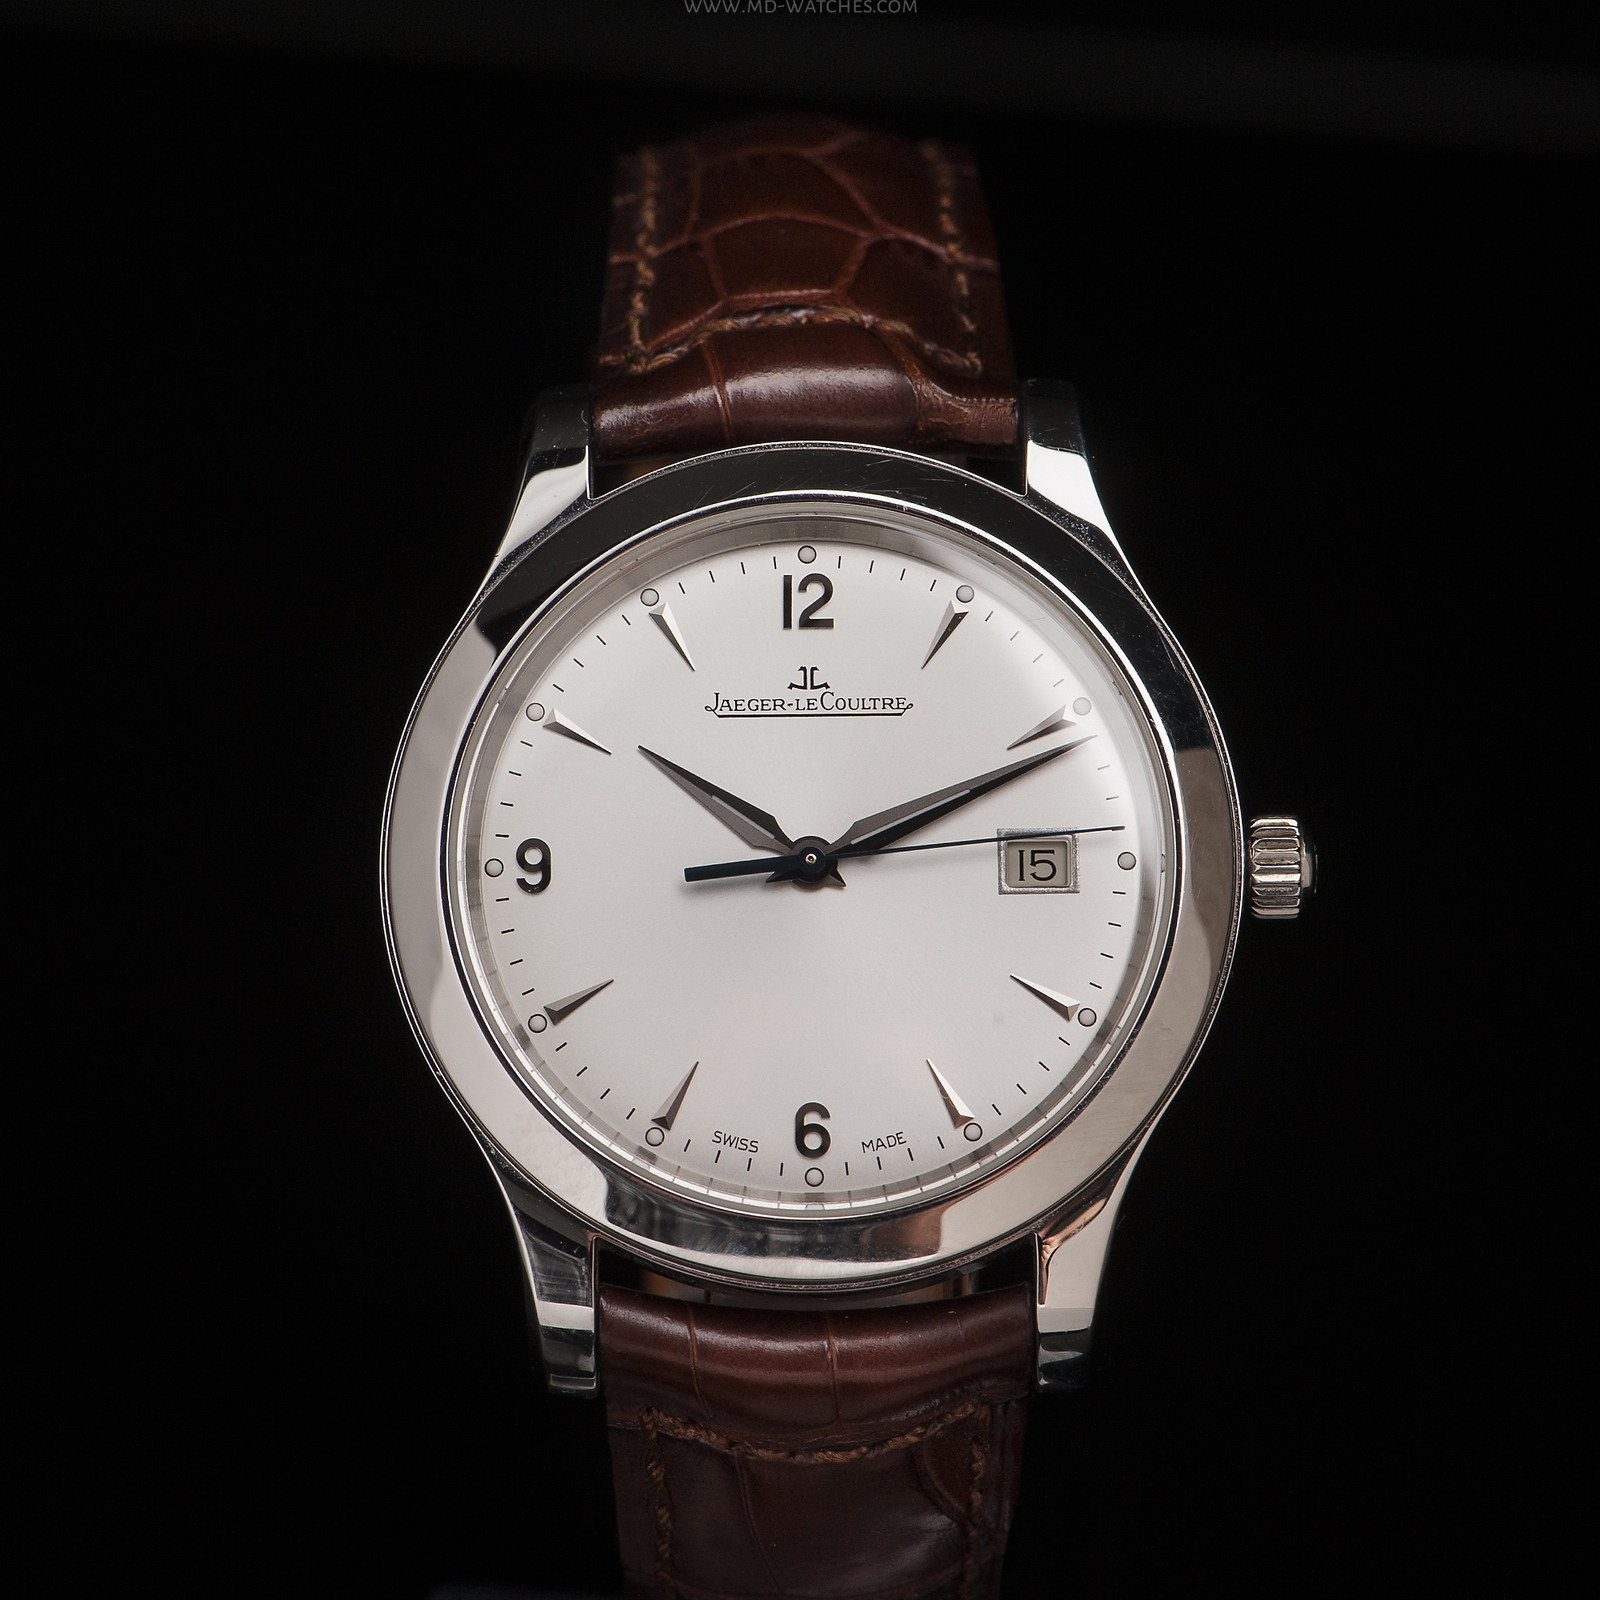 jaeger lecoultre master control date review